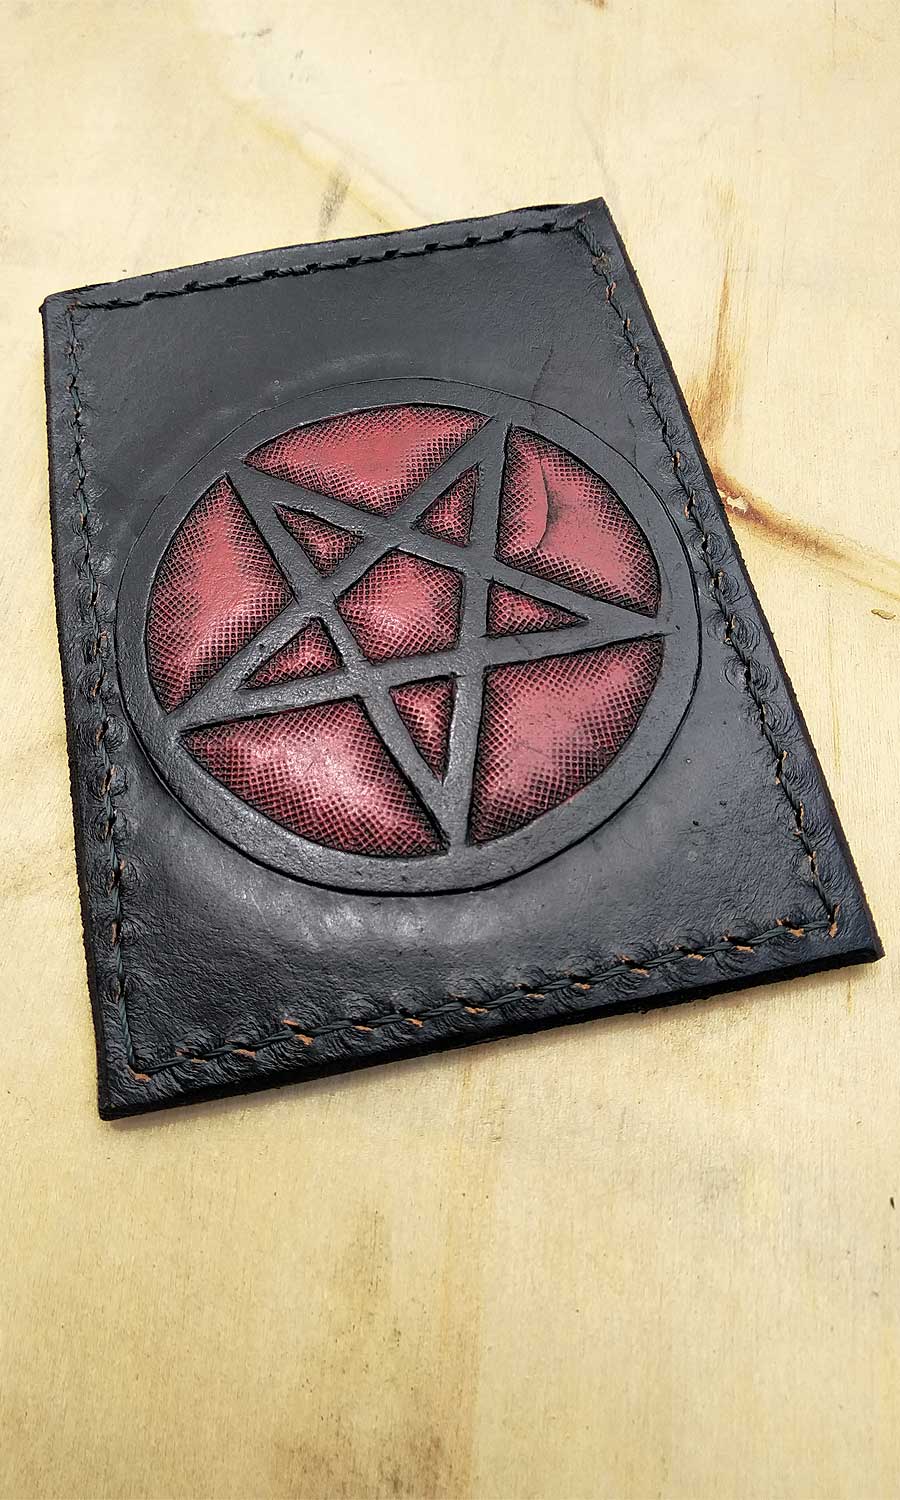 Pentagram ATM card holder by anothyer way of life